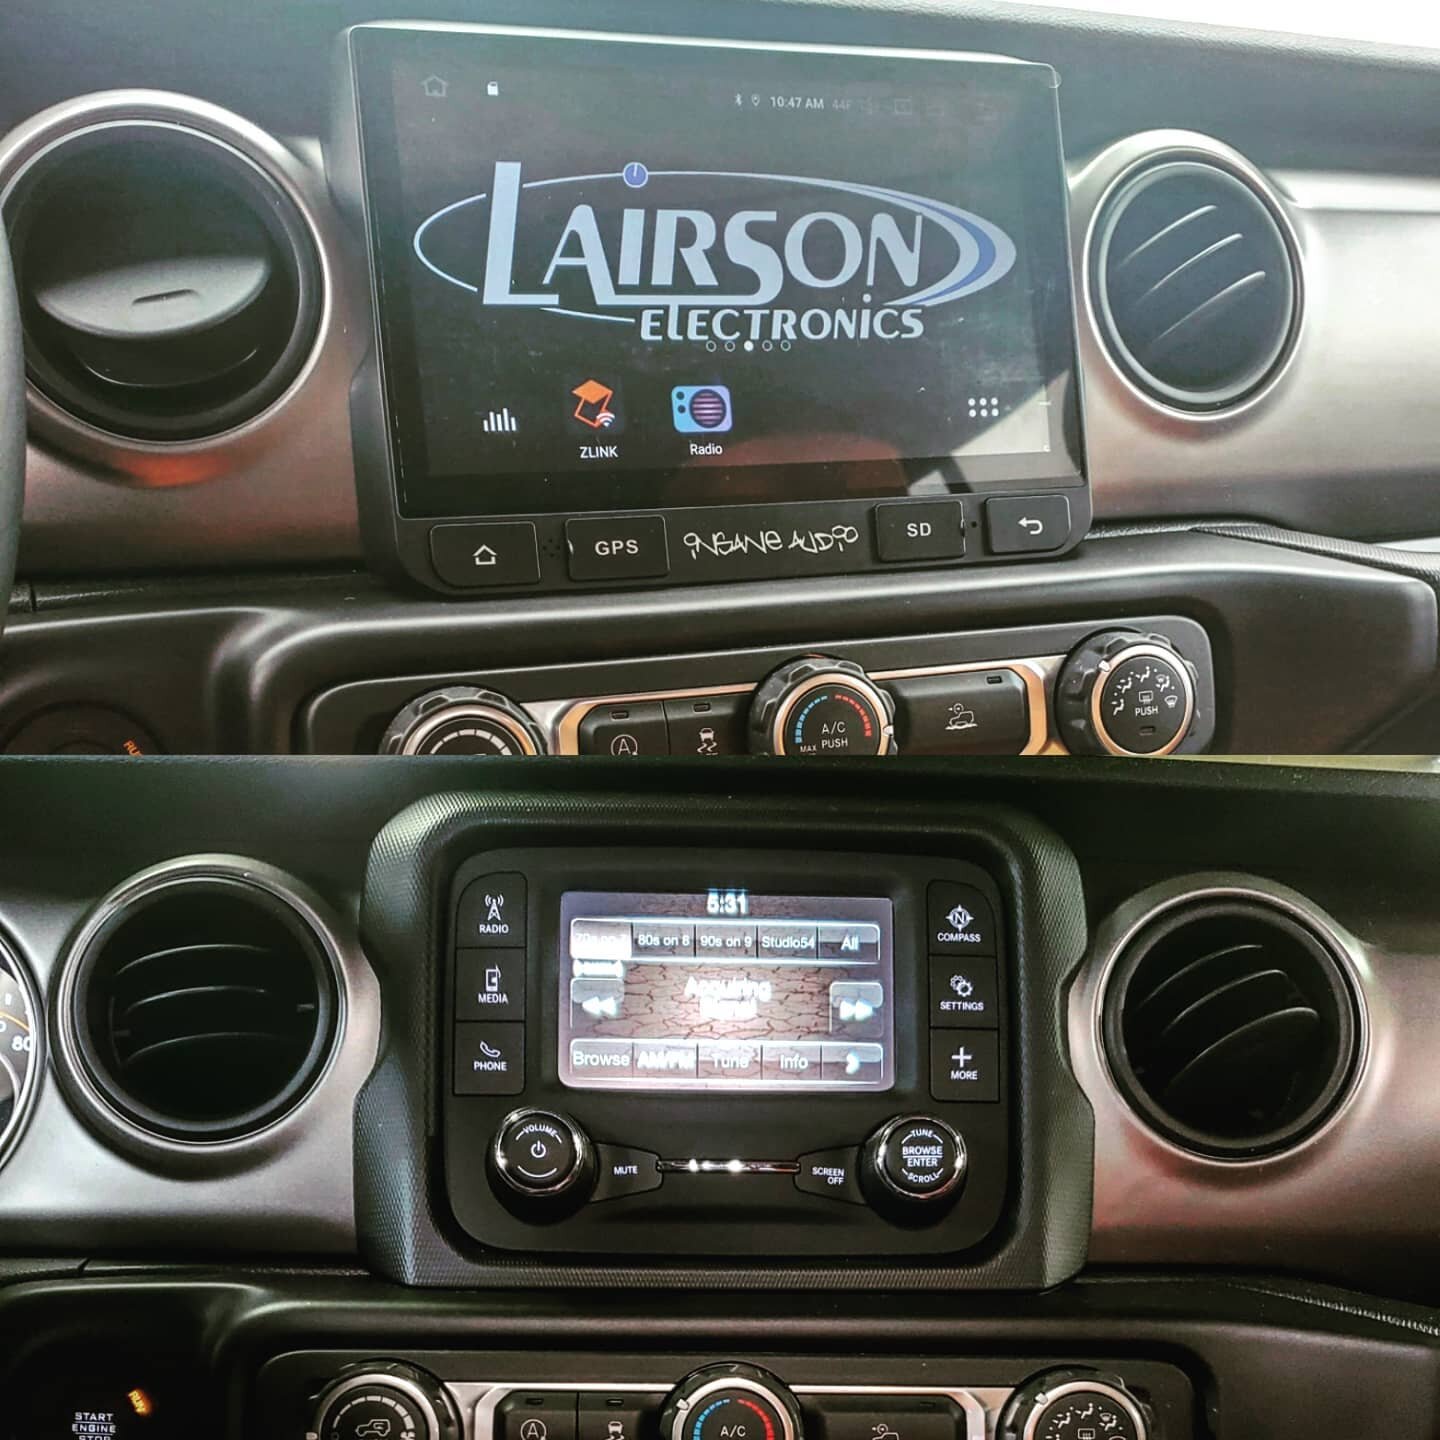 Installed an aftermarket oem radio replacement for this 2020 jeep gladiator from @insanejeepaudio

#jeep #jeepgladiator #carplay #headunit #mecp #mobileelectronics #installer #12volt #happycustomer #southjersey #business